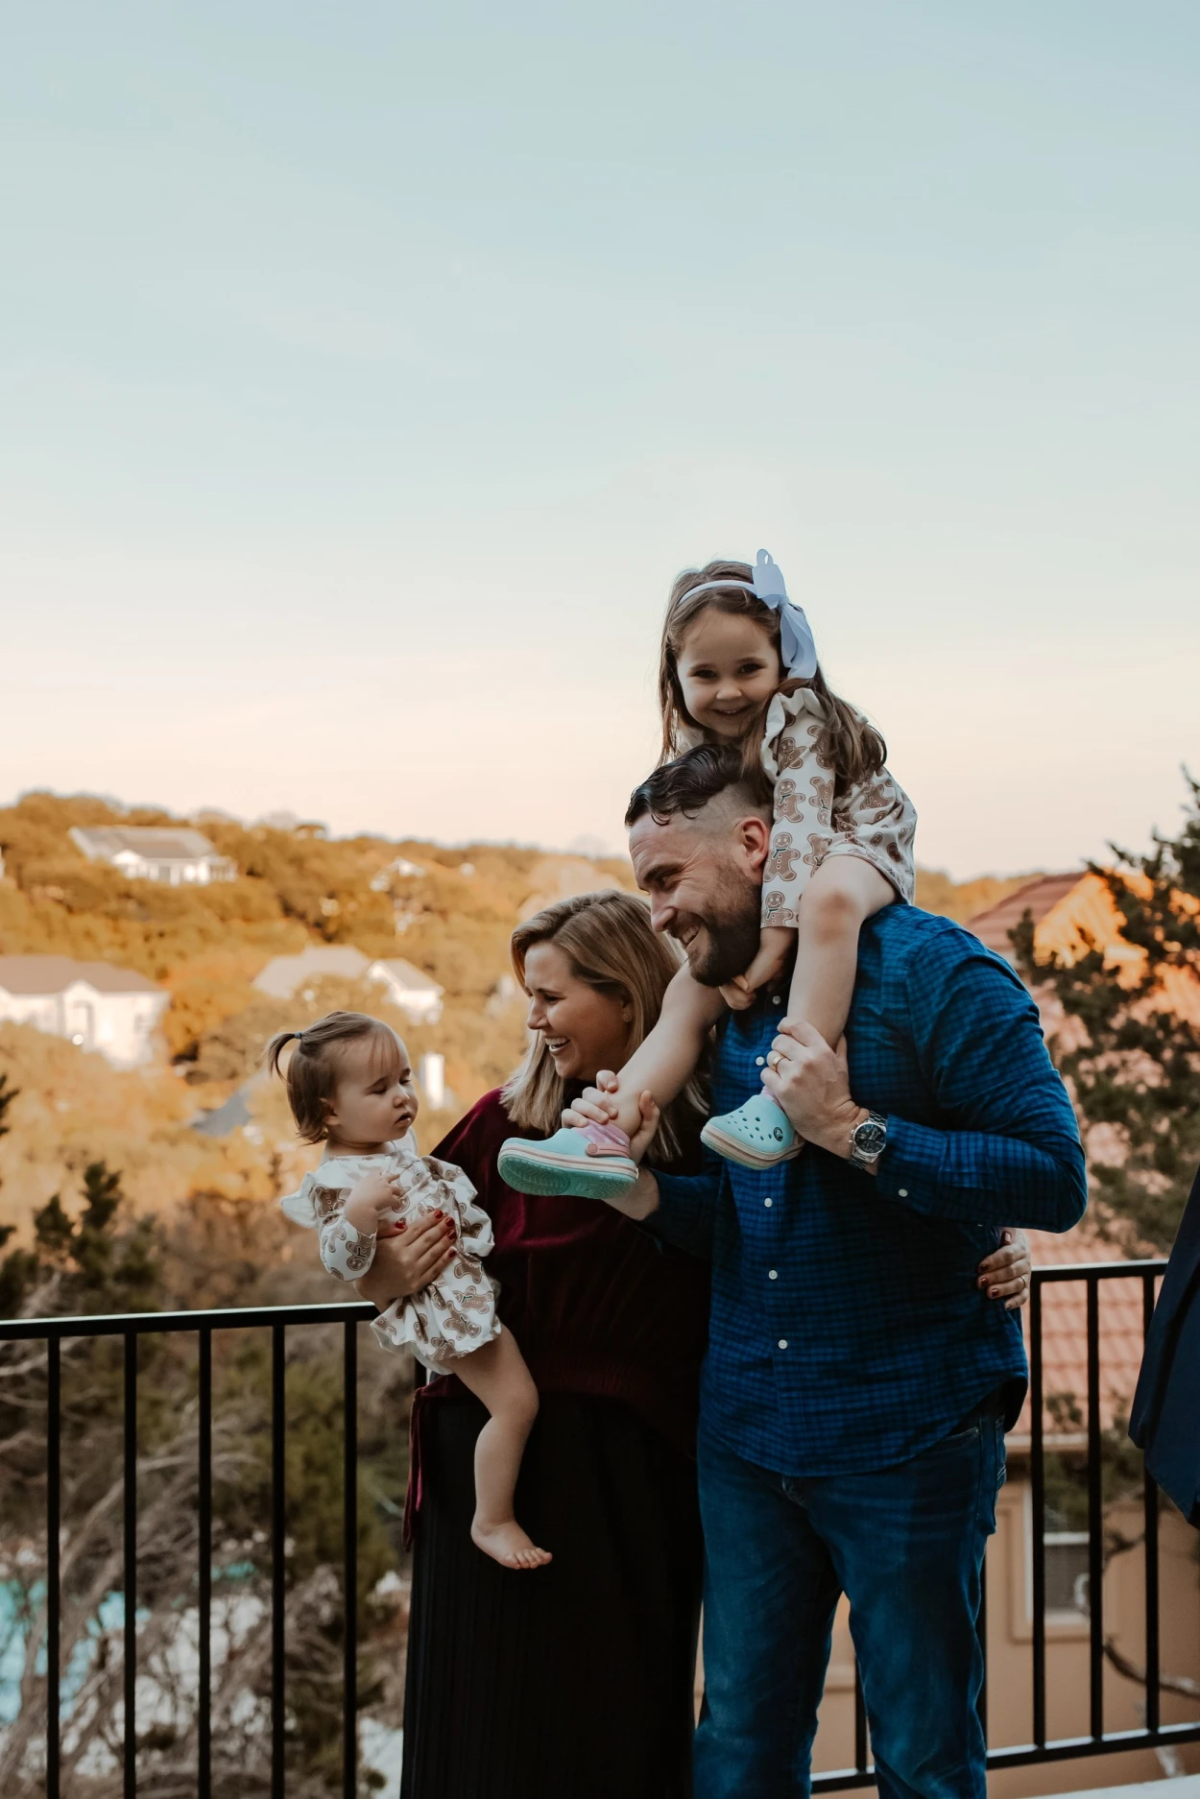 Amber Boyle with partner and two kids